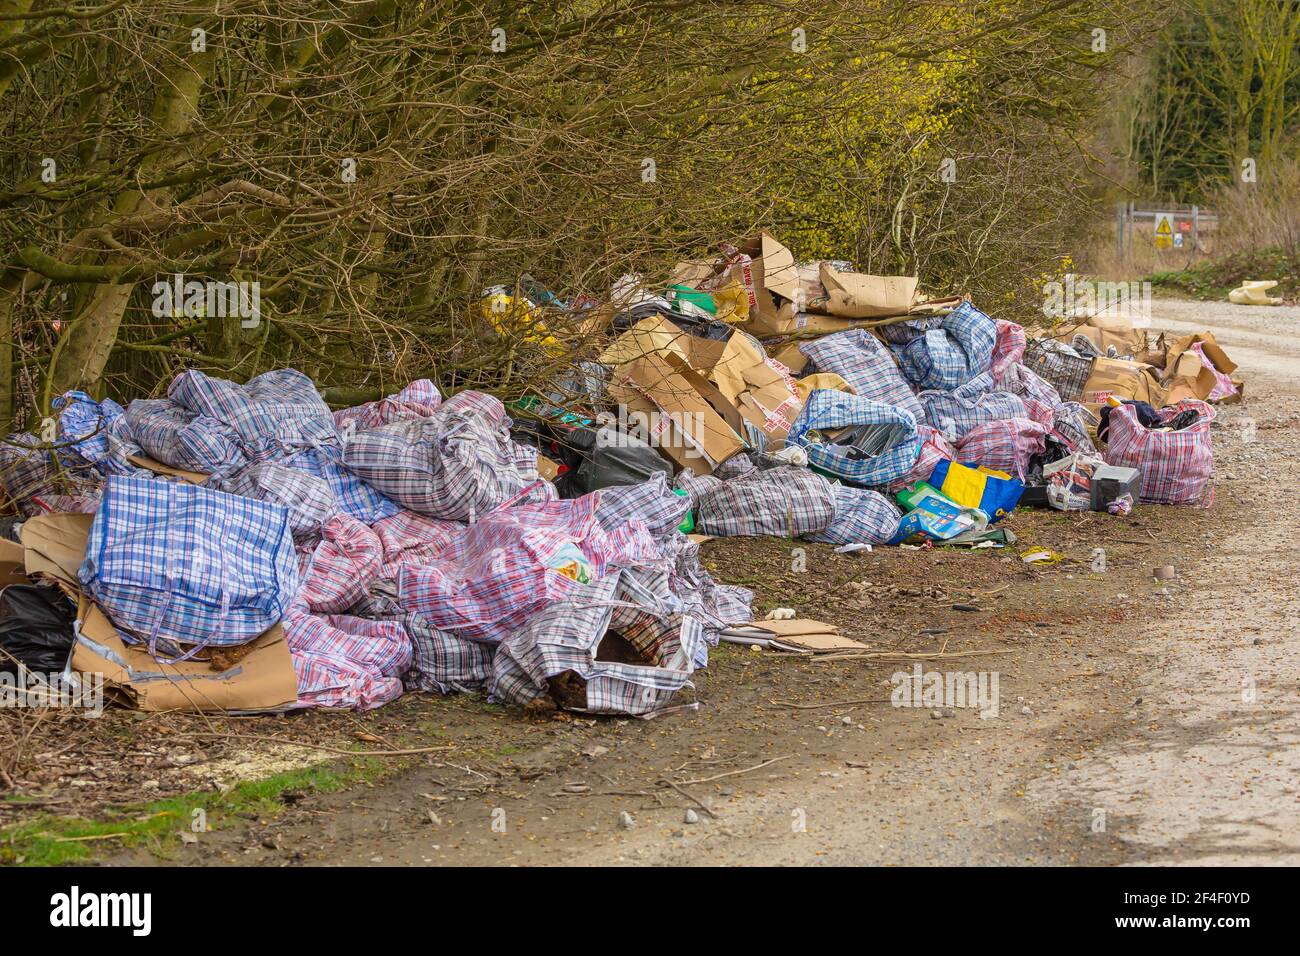 Yorkshire,England, 20/03/21. Fly-tipping down a quiet country lane.  Extreme amount of household and garden waste illegally dumped in open countryside Stock Photo